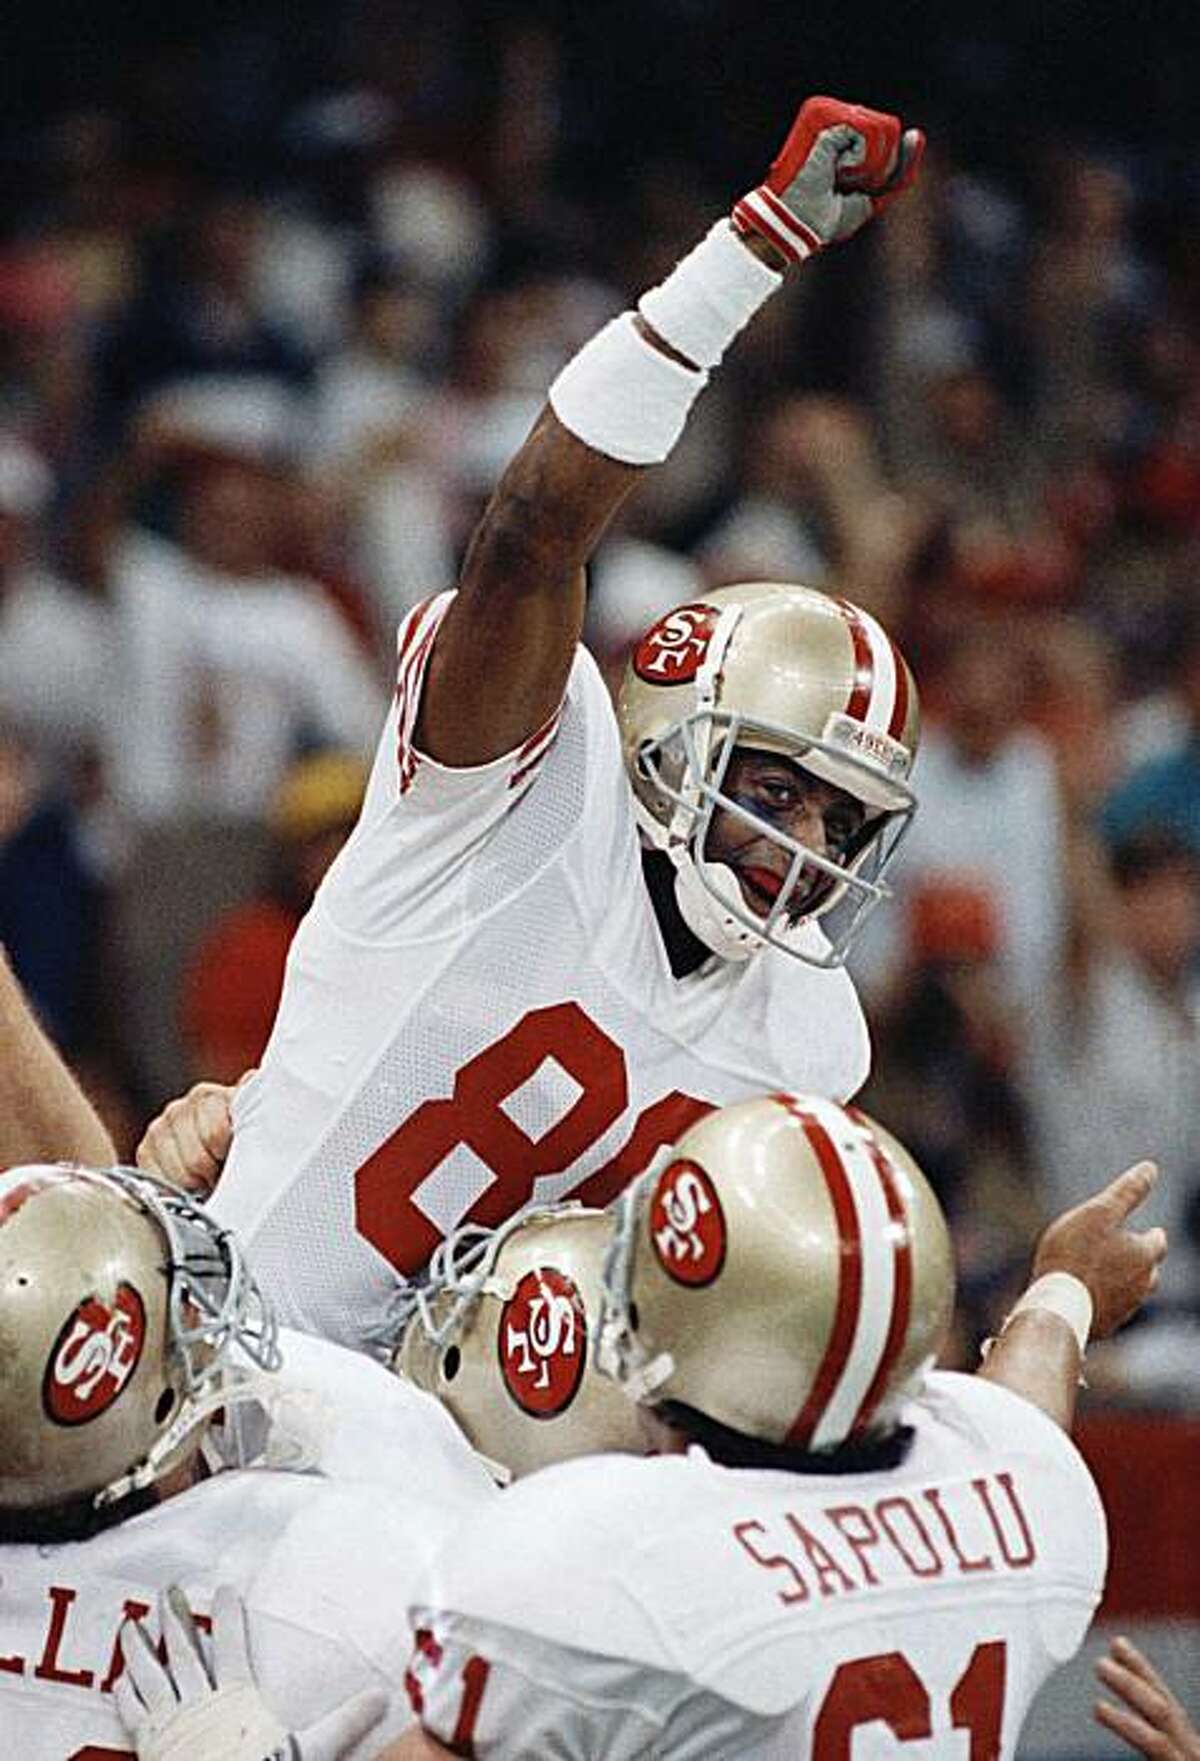 FILE - In this Jan. 28, 1990 file photo, San Francisco 49ers wide receiver Jerry Rice raises his fist in jubilation after scoring his second touchdown of the day with 34 seconds left in the second quarter against the Denver Broncos in New Orleans at SuperBowl XXIV. Rice caught more passes and scored more touchdowns than anyone else. Emmitt Smith ran for more yards than any other NFL player. Sure seems appropriate for them to enter the Pro Football Hall of Fame together, and it figures to happen Saturday,Feb. 6, 2010.